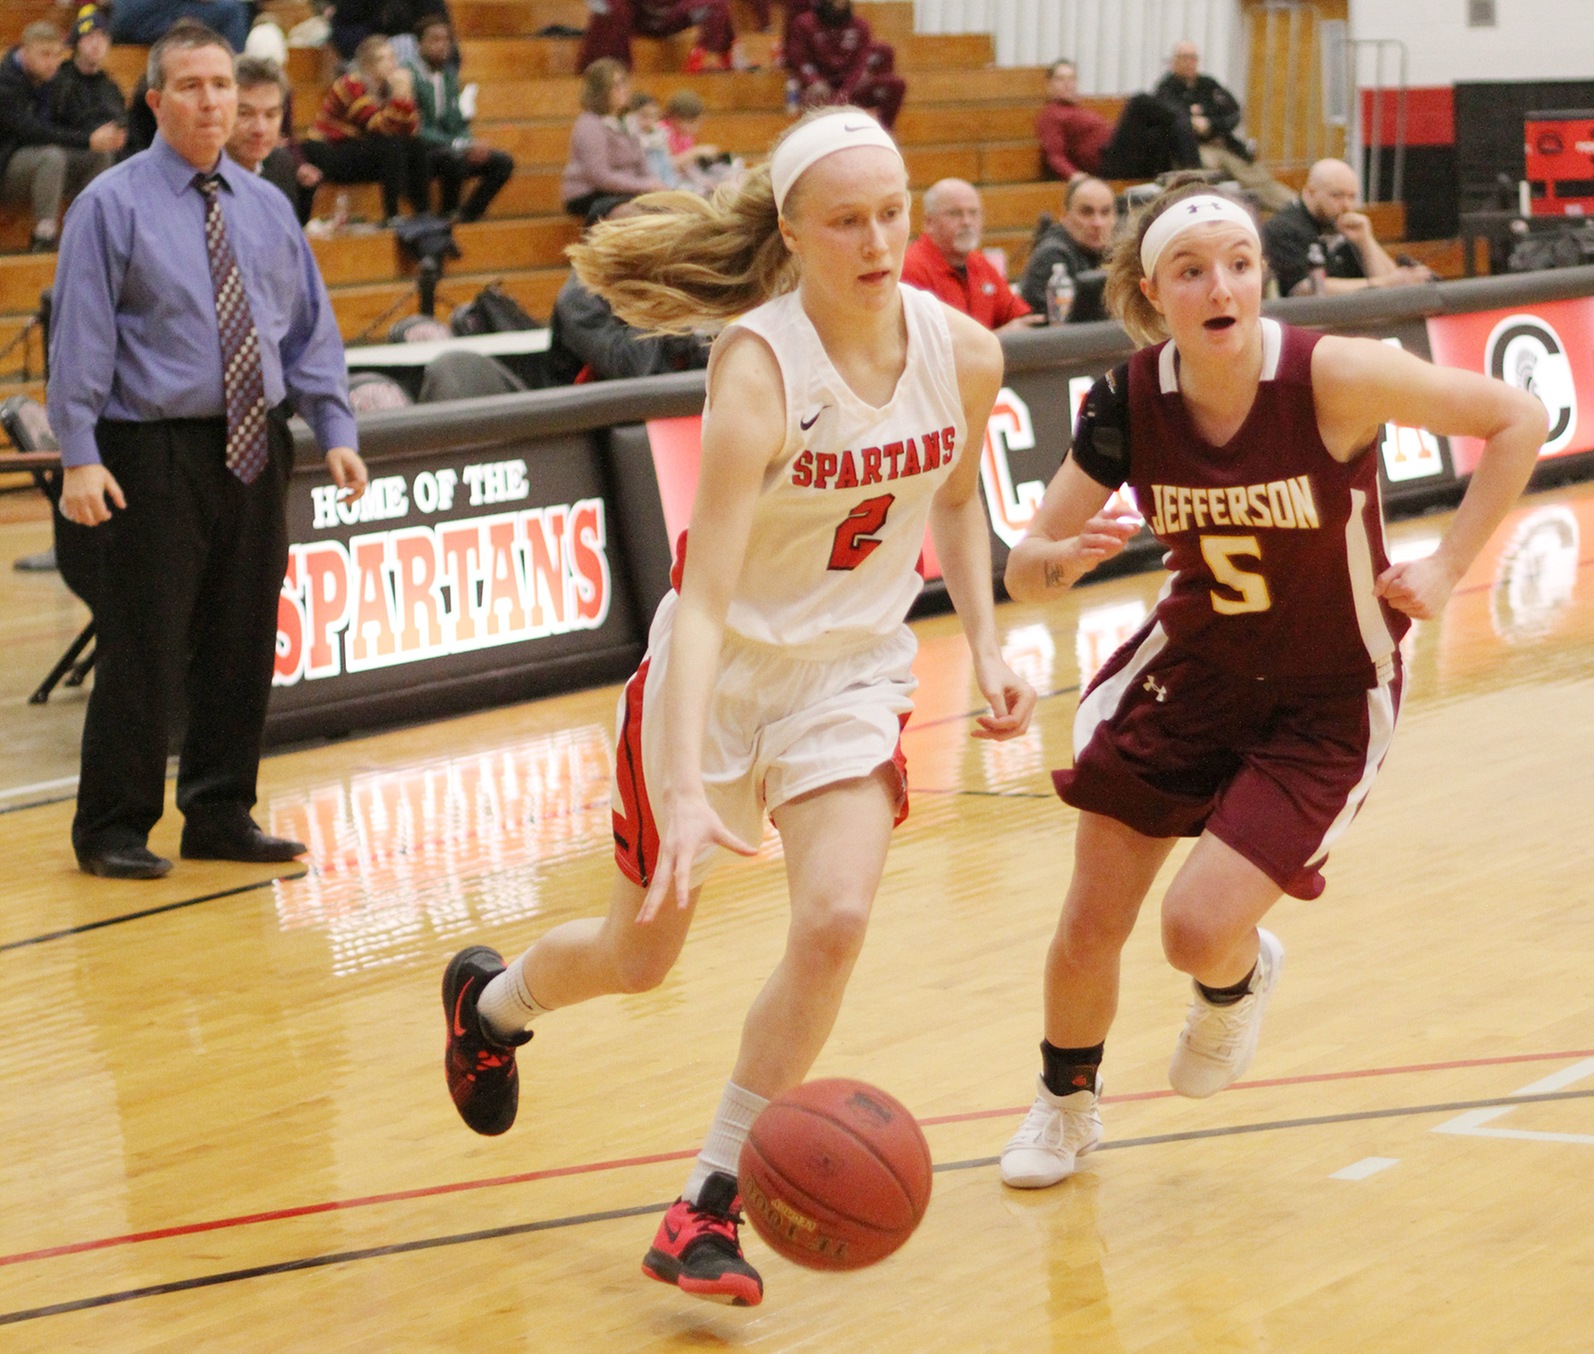 Erica Helzer was one of two Spartans who scored 13 points against Corning Community College.